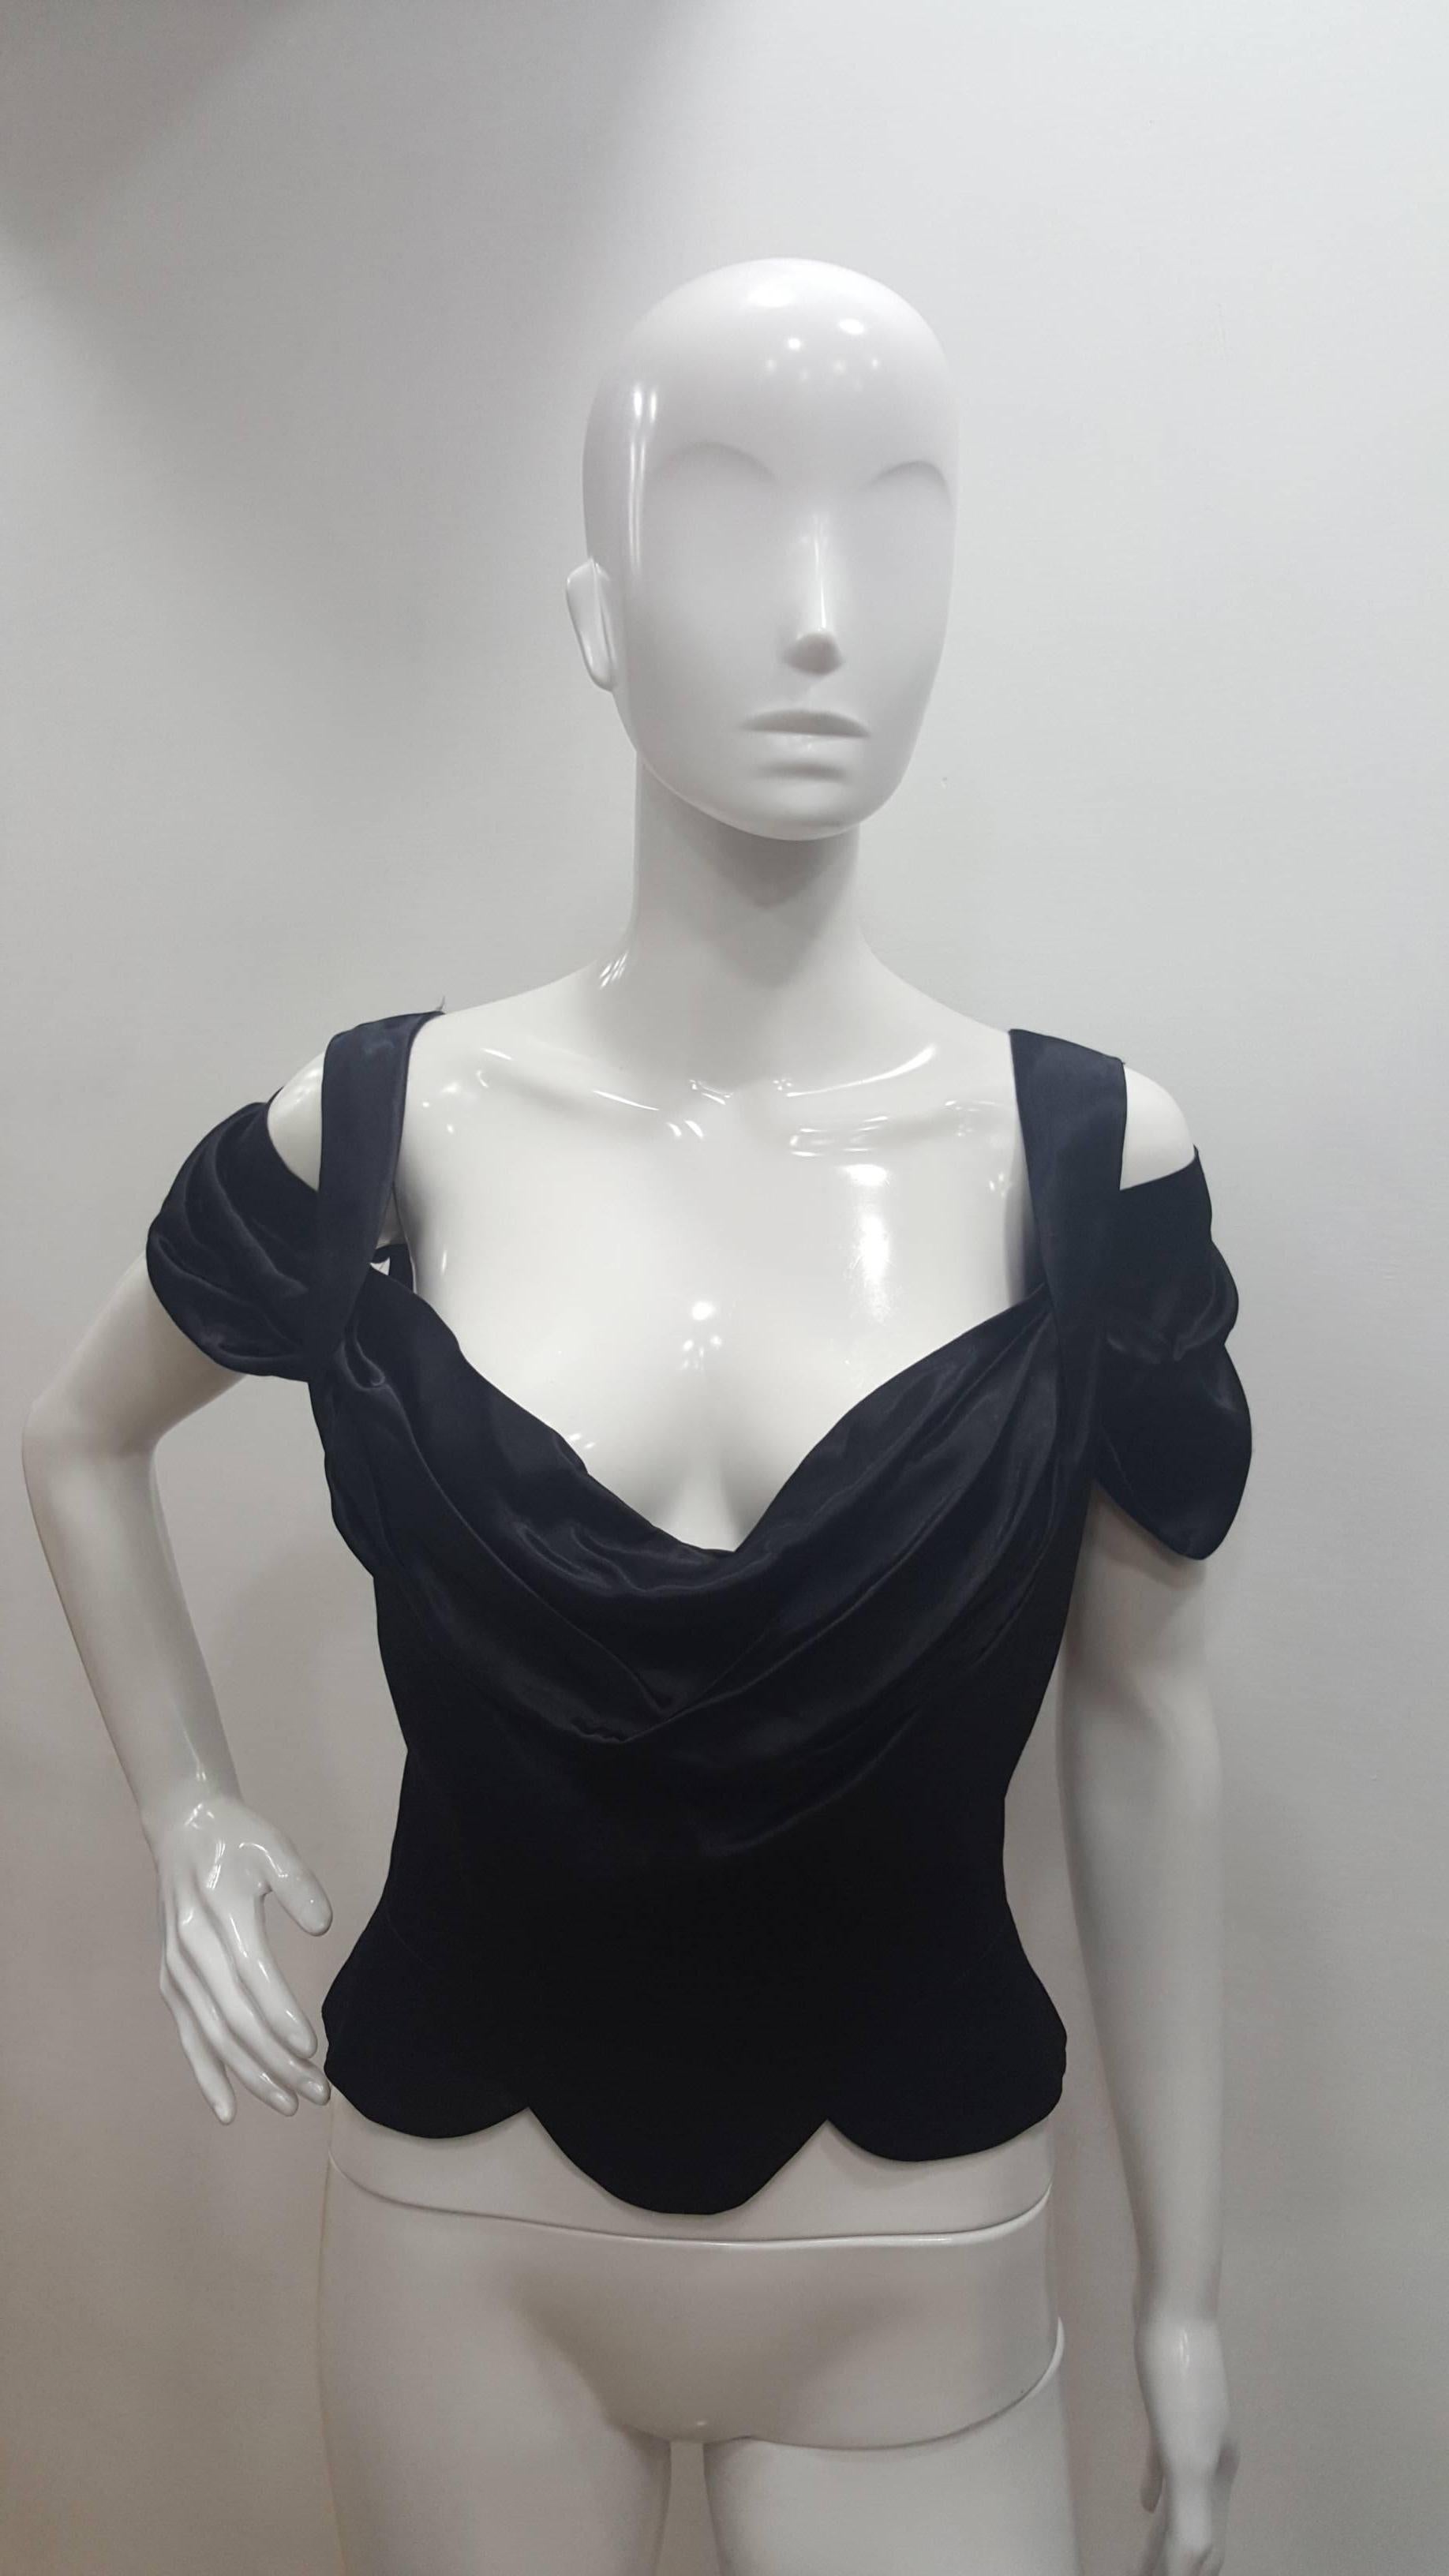 1990s Vivienne Westwood black corset 
100% viscose
Totally made in italy
Available in 2 sizes:
1 Italian size range 40
1 Italian size range 44